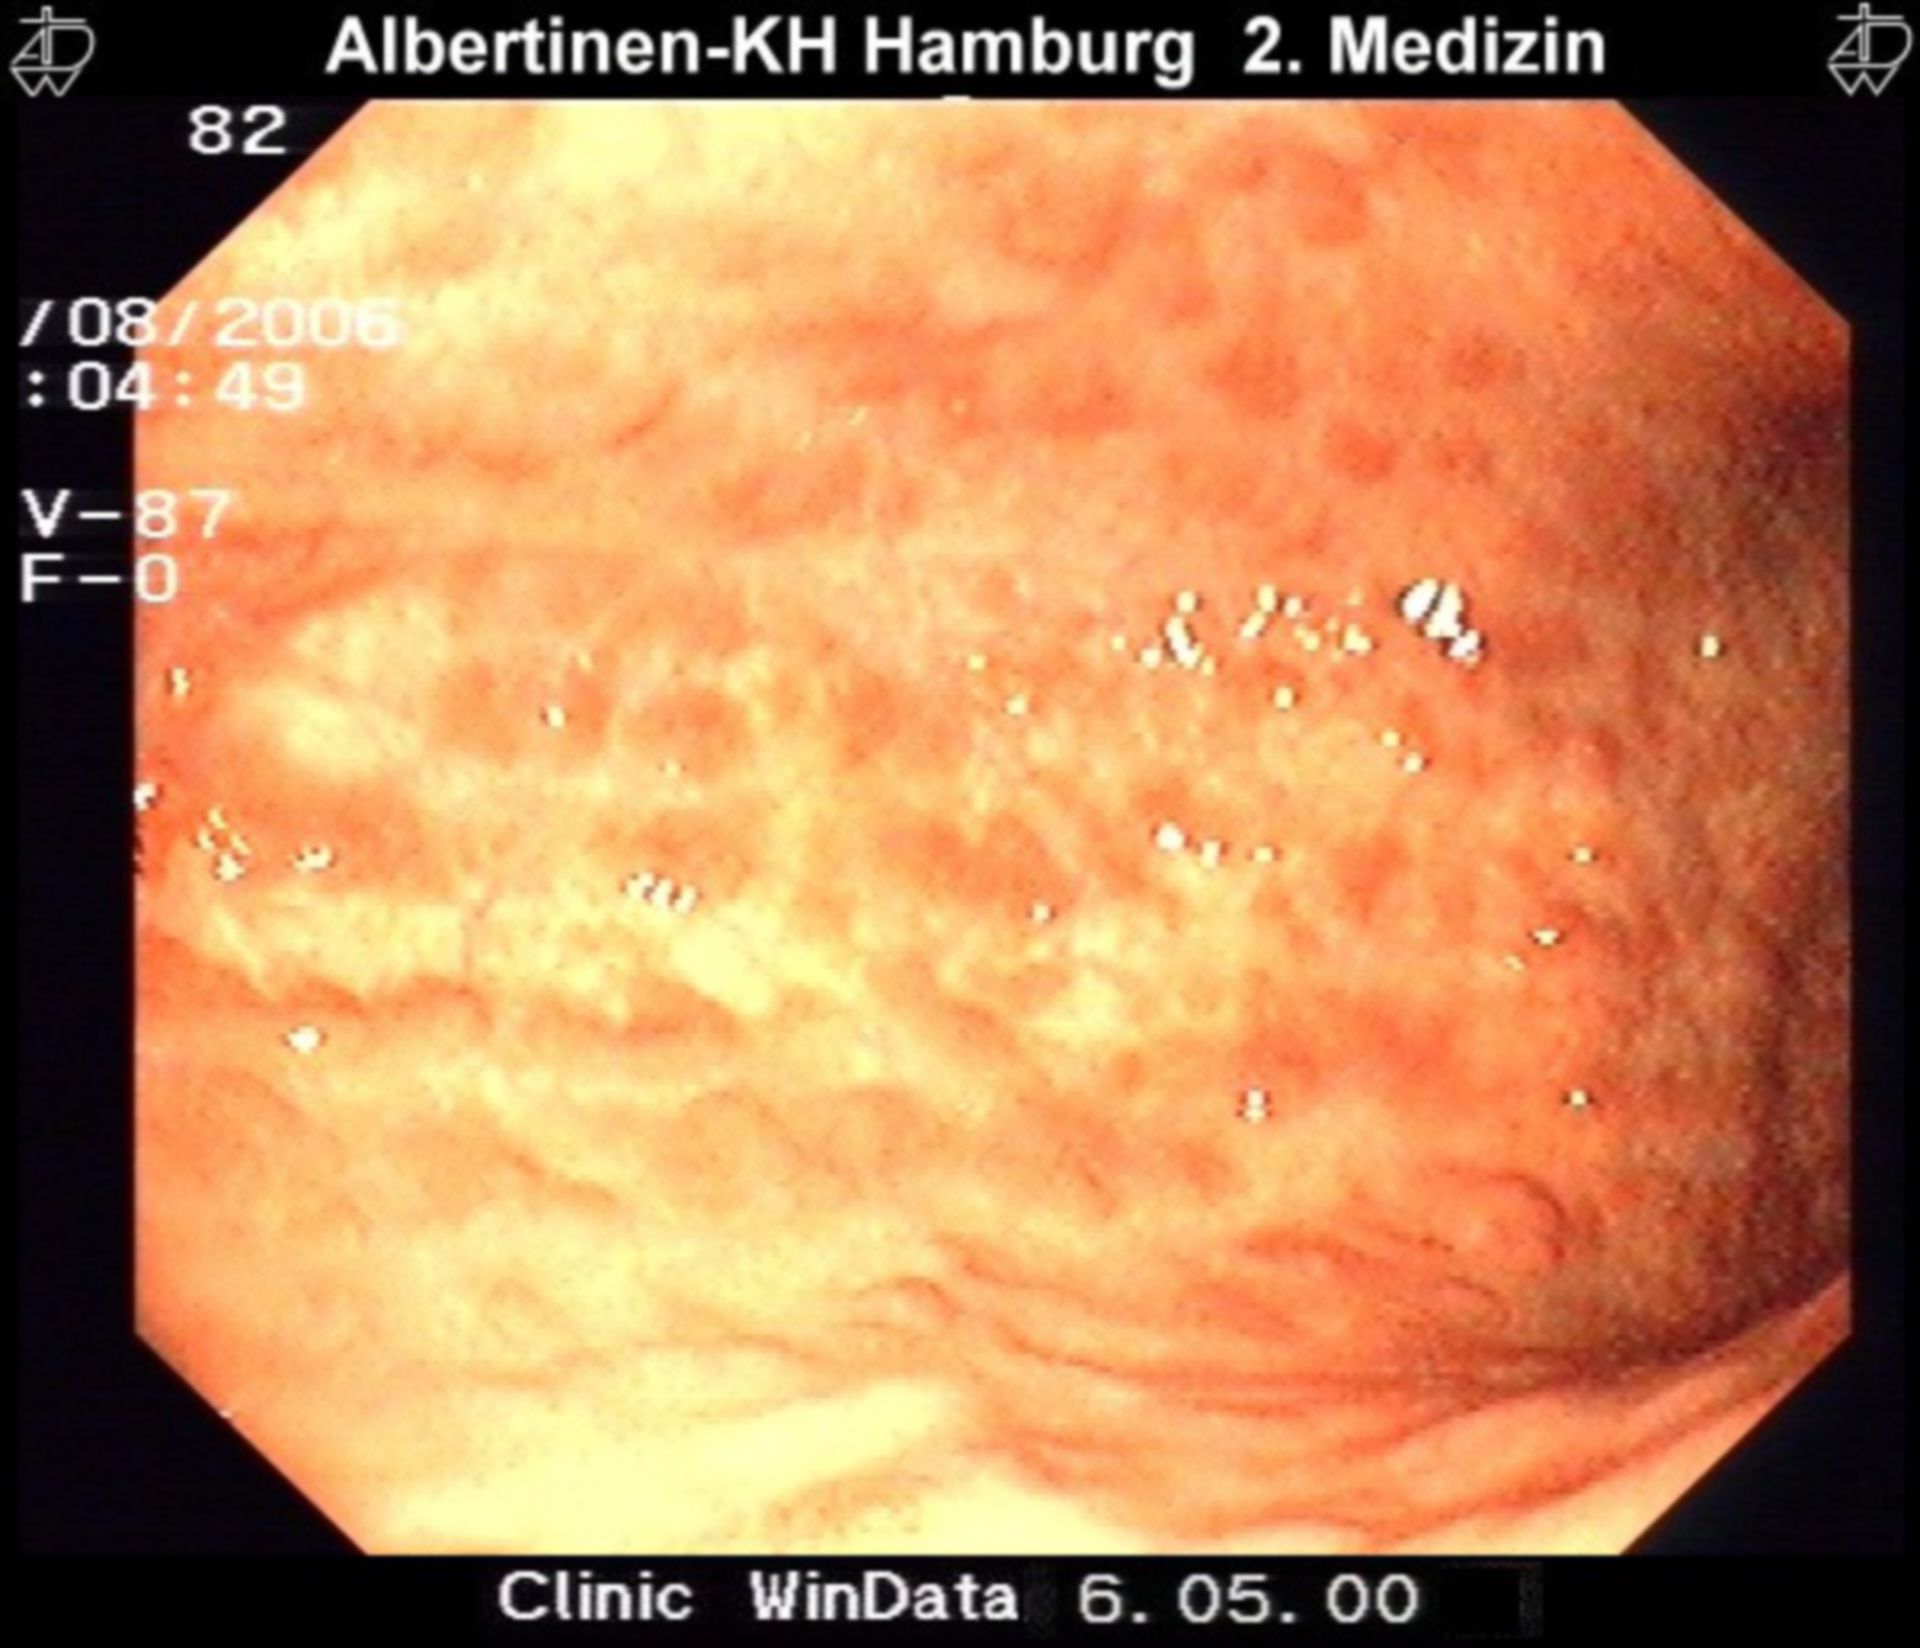 Blotchy-like atrophy of the gastric mucosa